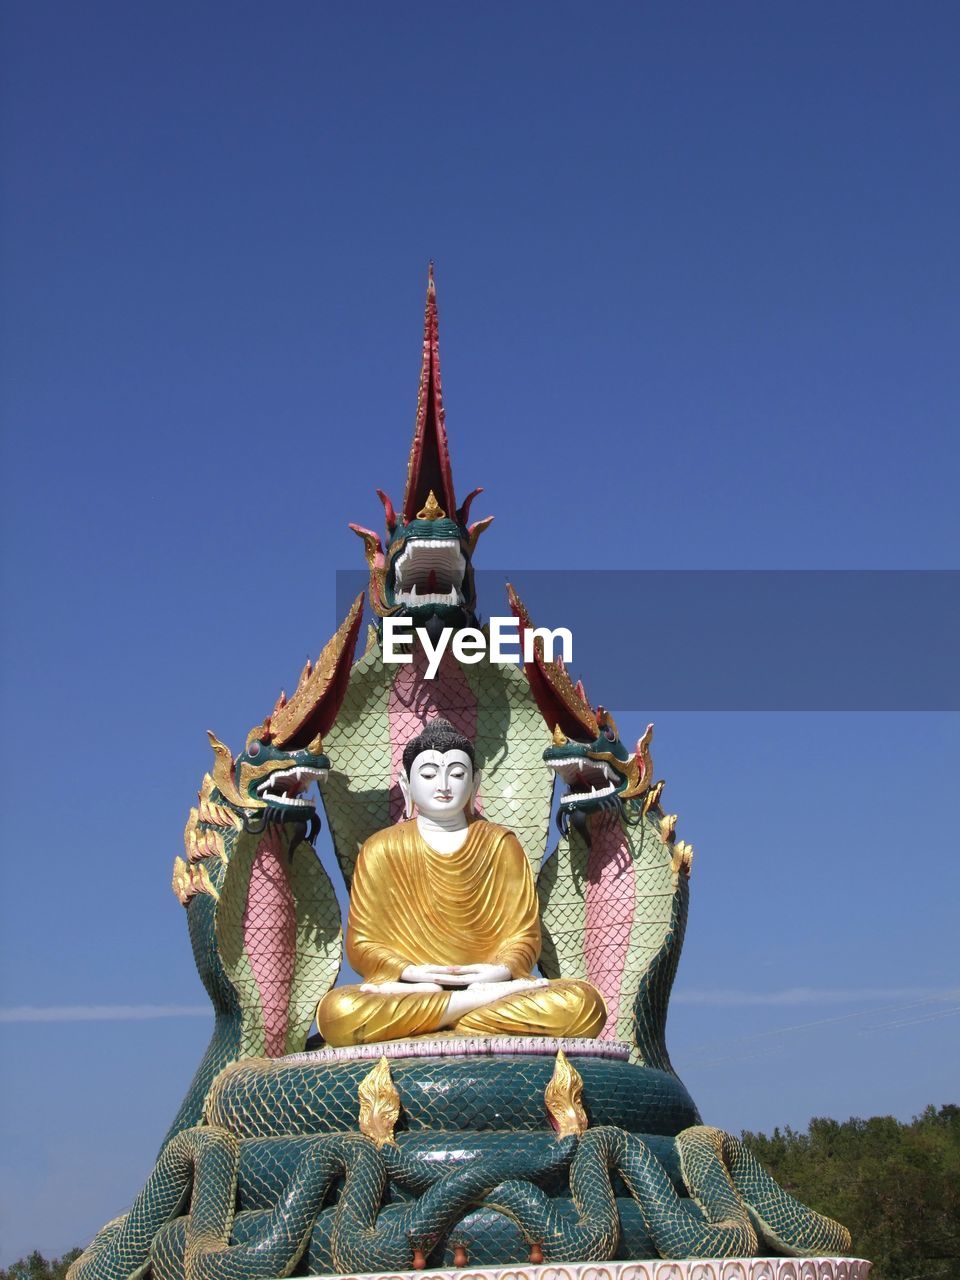 LOW ANGLE VIEW OF STATUE AGAINST CLEAR SKY